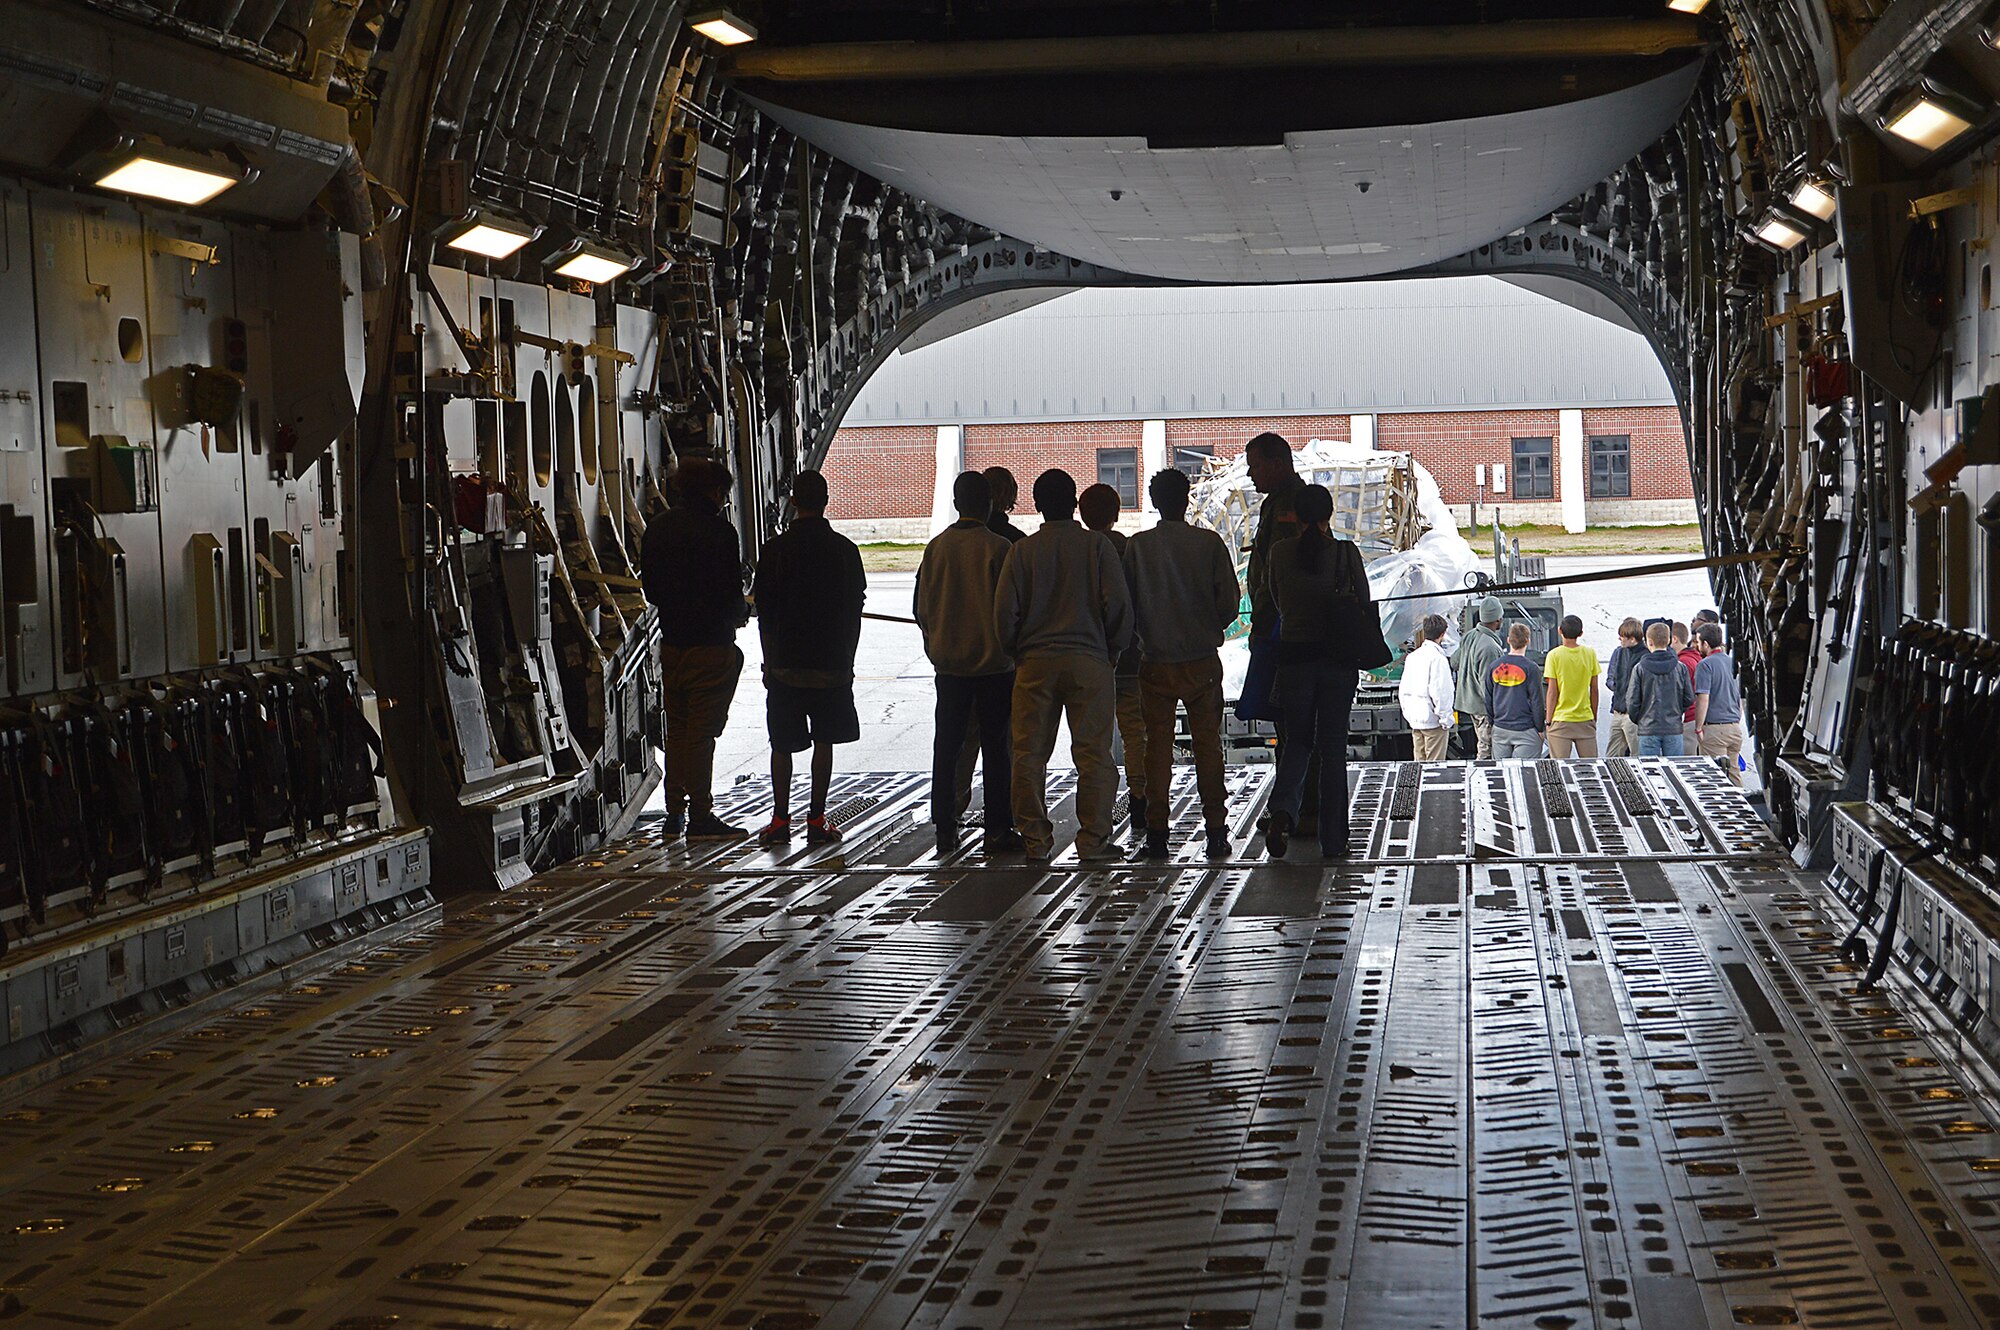 Master Sgt. Tim Schnaible, 300th Airlift Squadron loadmaster, explains to students how cargo is loaded onto a C-17 Globemaster III  at the Joint Base Charleston Tuskegee Airmen Career Day Feb. 25, 2016. The 315th Airlift Wing's first Tuskegee Airmen Career Day drew  over 130 local teenage boys to Joint Base Charleston, S.C. to learn about careers in aviation. The event also celebrated the story of the first black pilots in the American military – the Tuskegee Airmen. (courtesy photo by Senior Master Sgt. Eric Keys)
